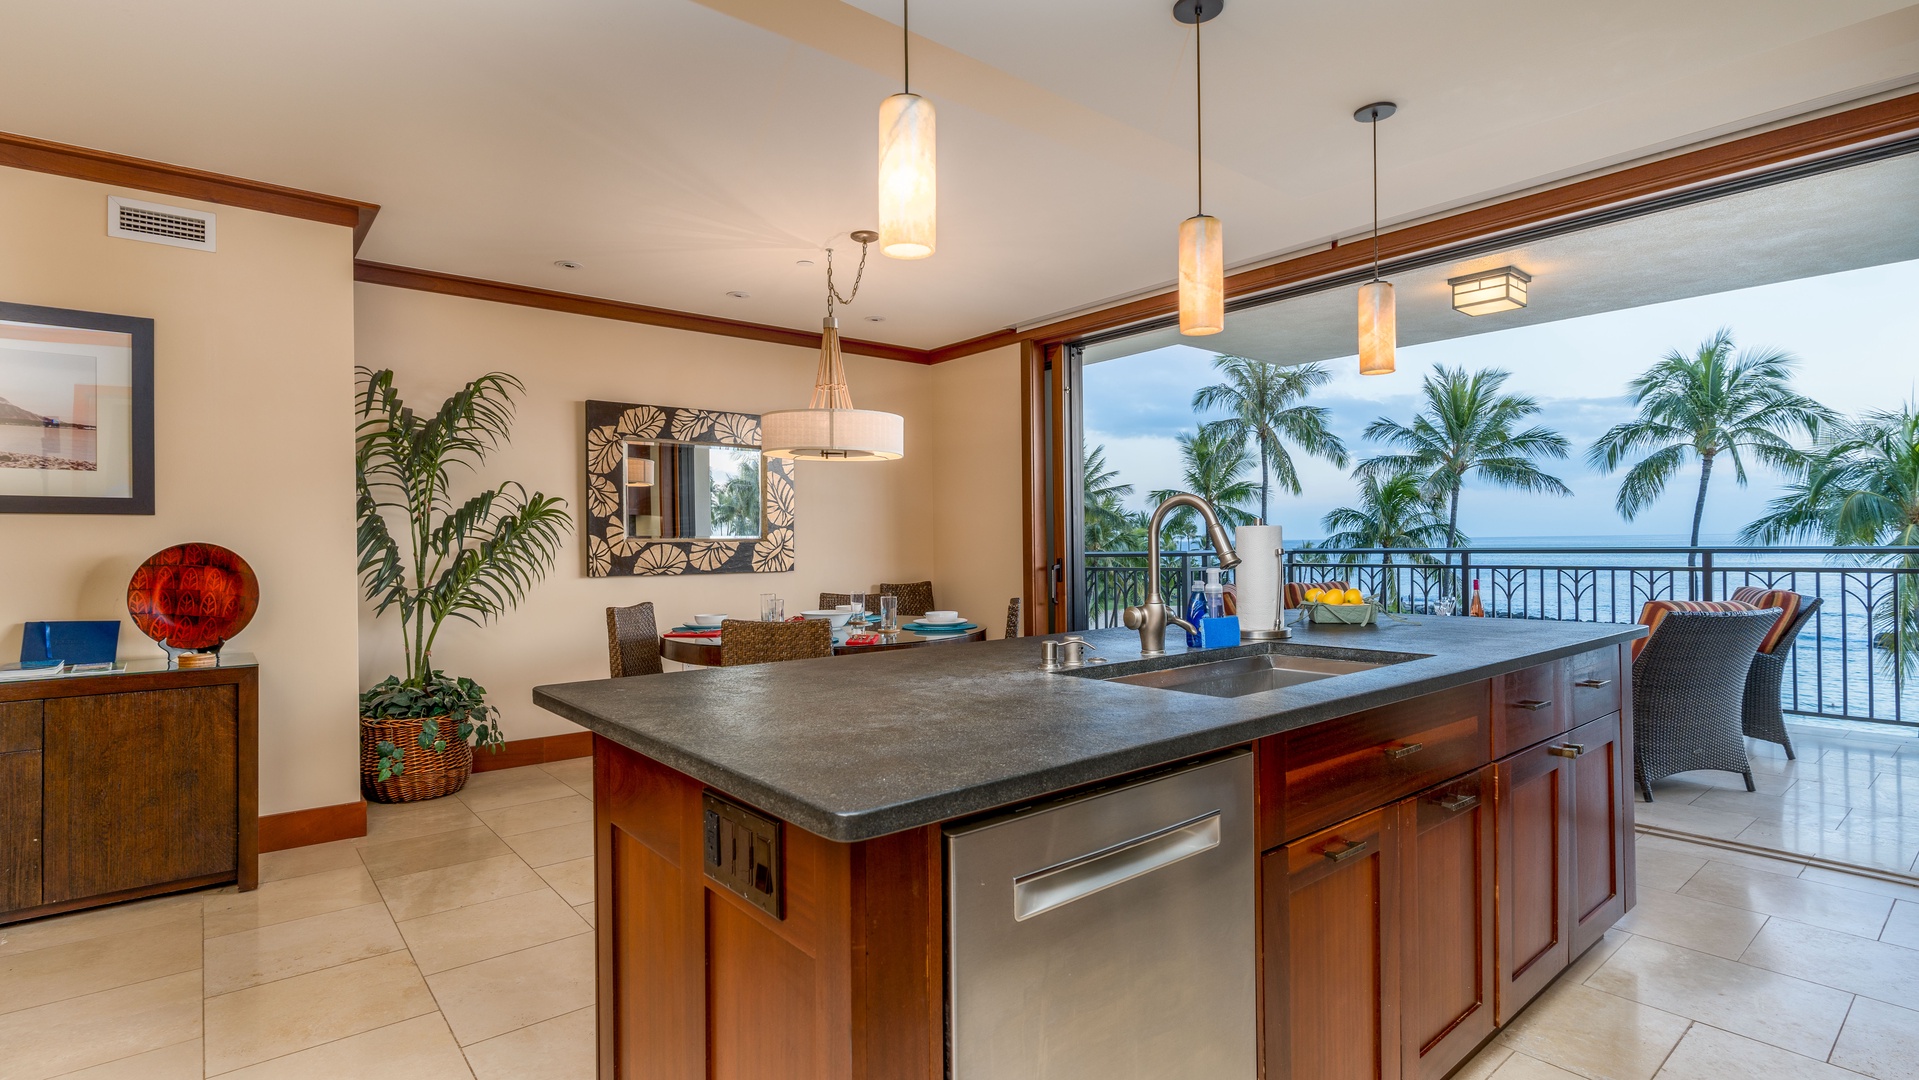 Kapolei Vacation Rentals, Ko Olina Beach Villas B310 - Your culinary adventures await with all the kitchen amenities you need.